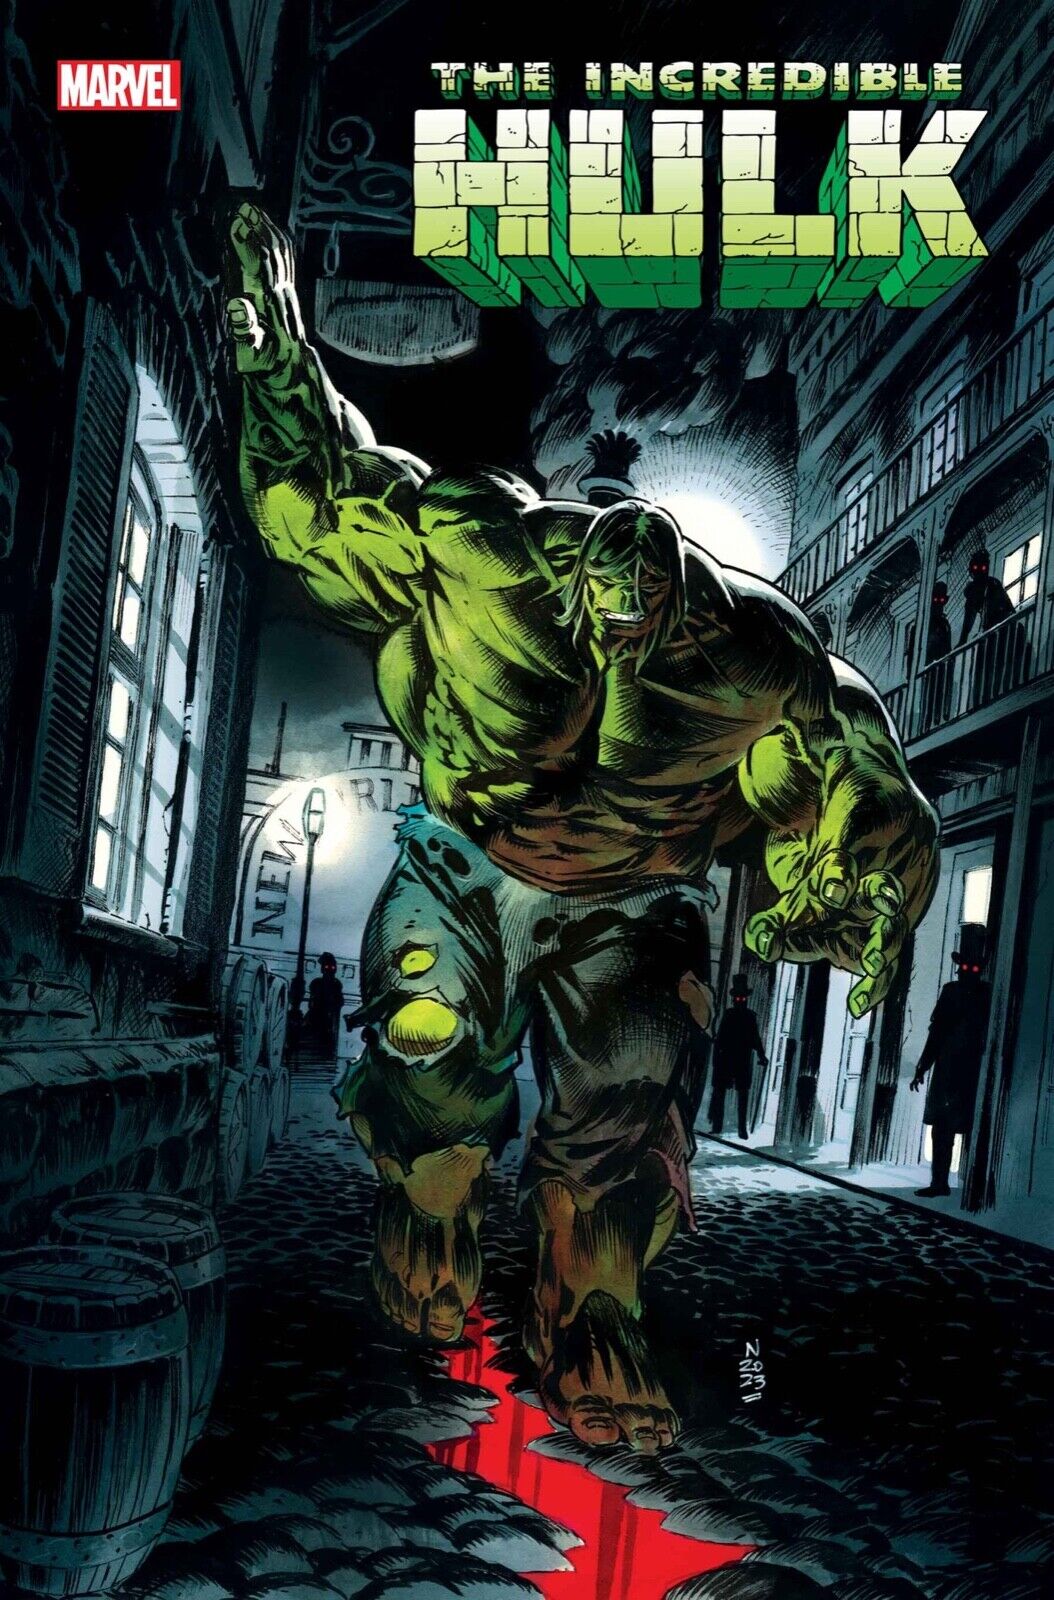 Marvel ComicsThe Incredible Hulk #10  Cover  A B C  - In stock - NM